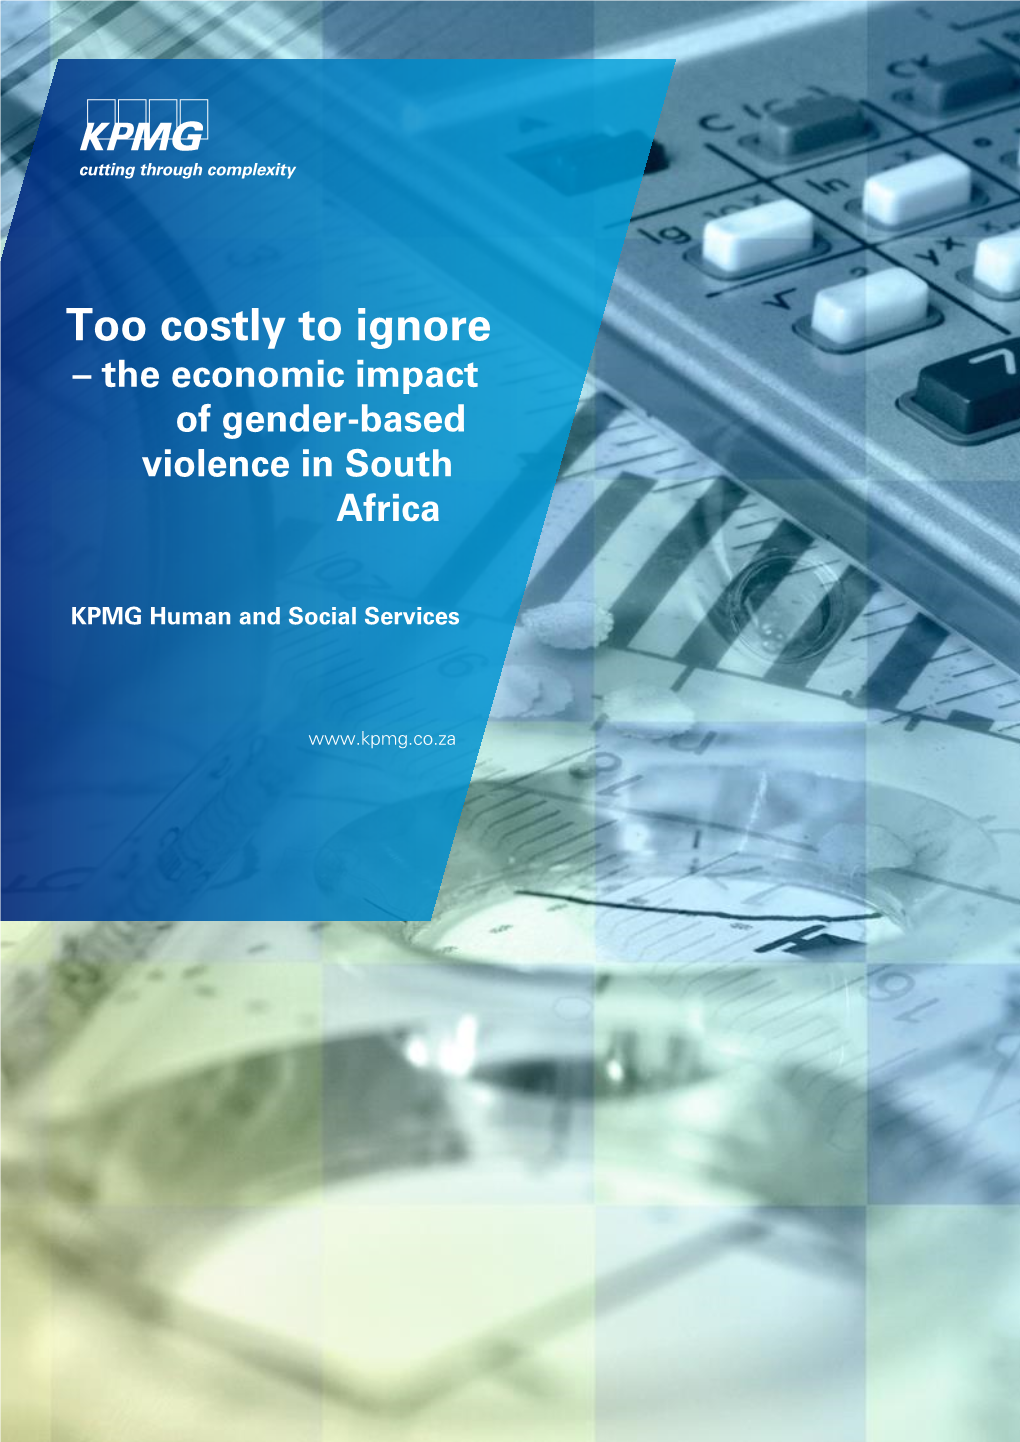 The Economic Impact of Gender-Based Violence in South Africa